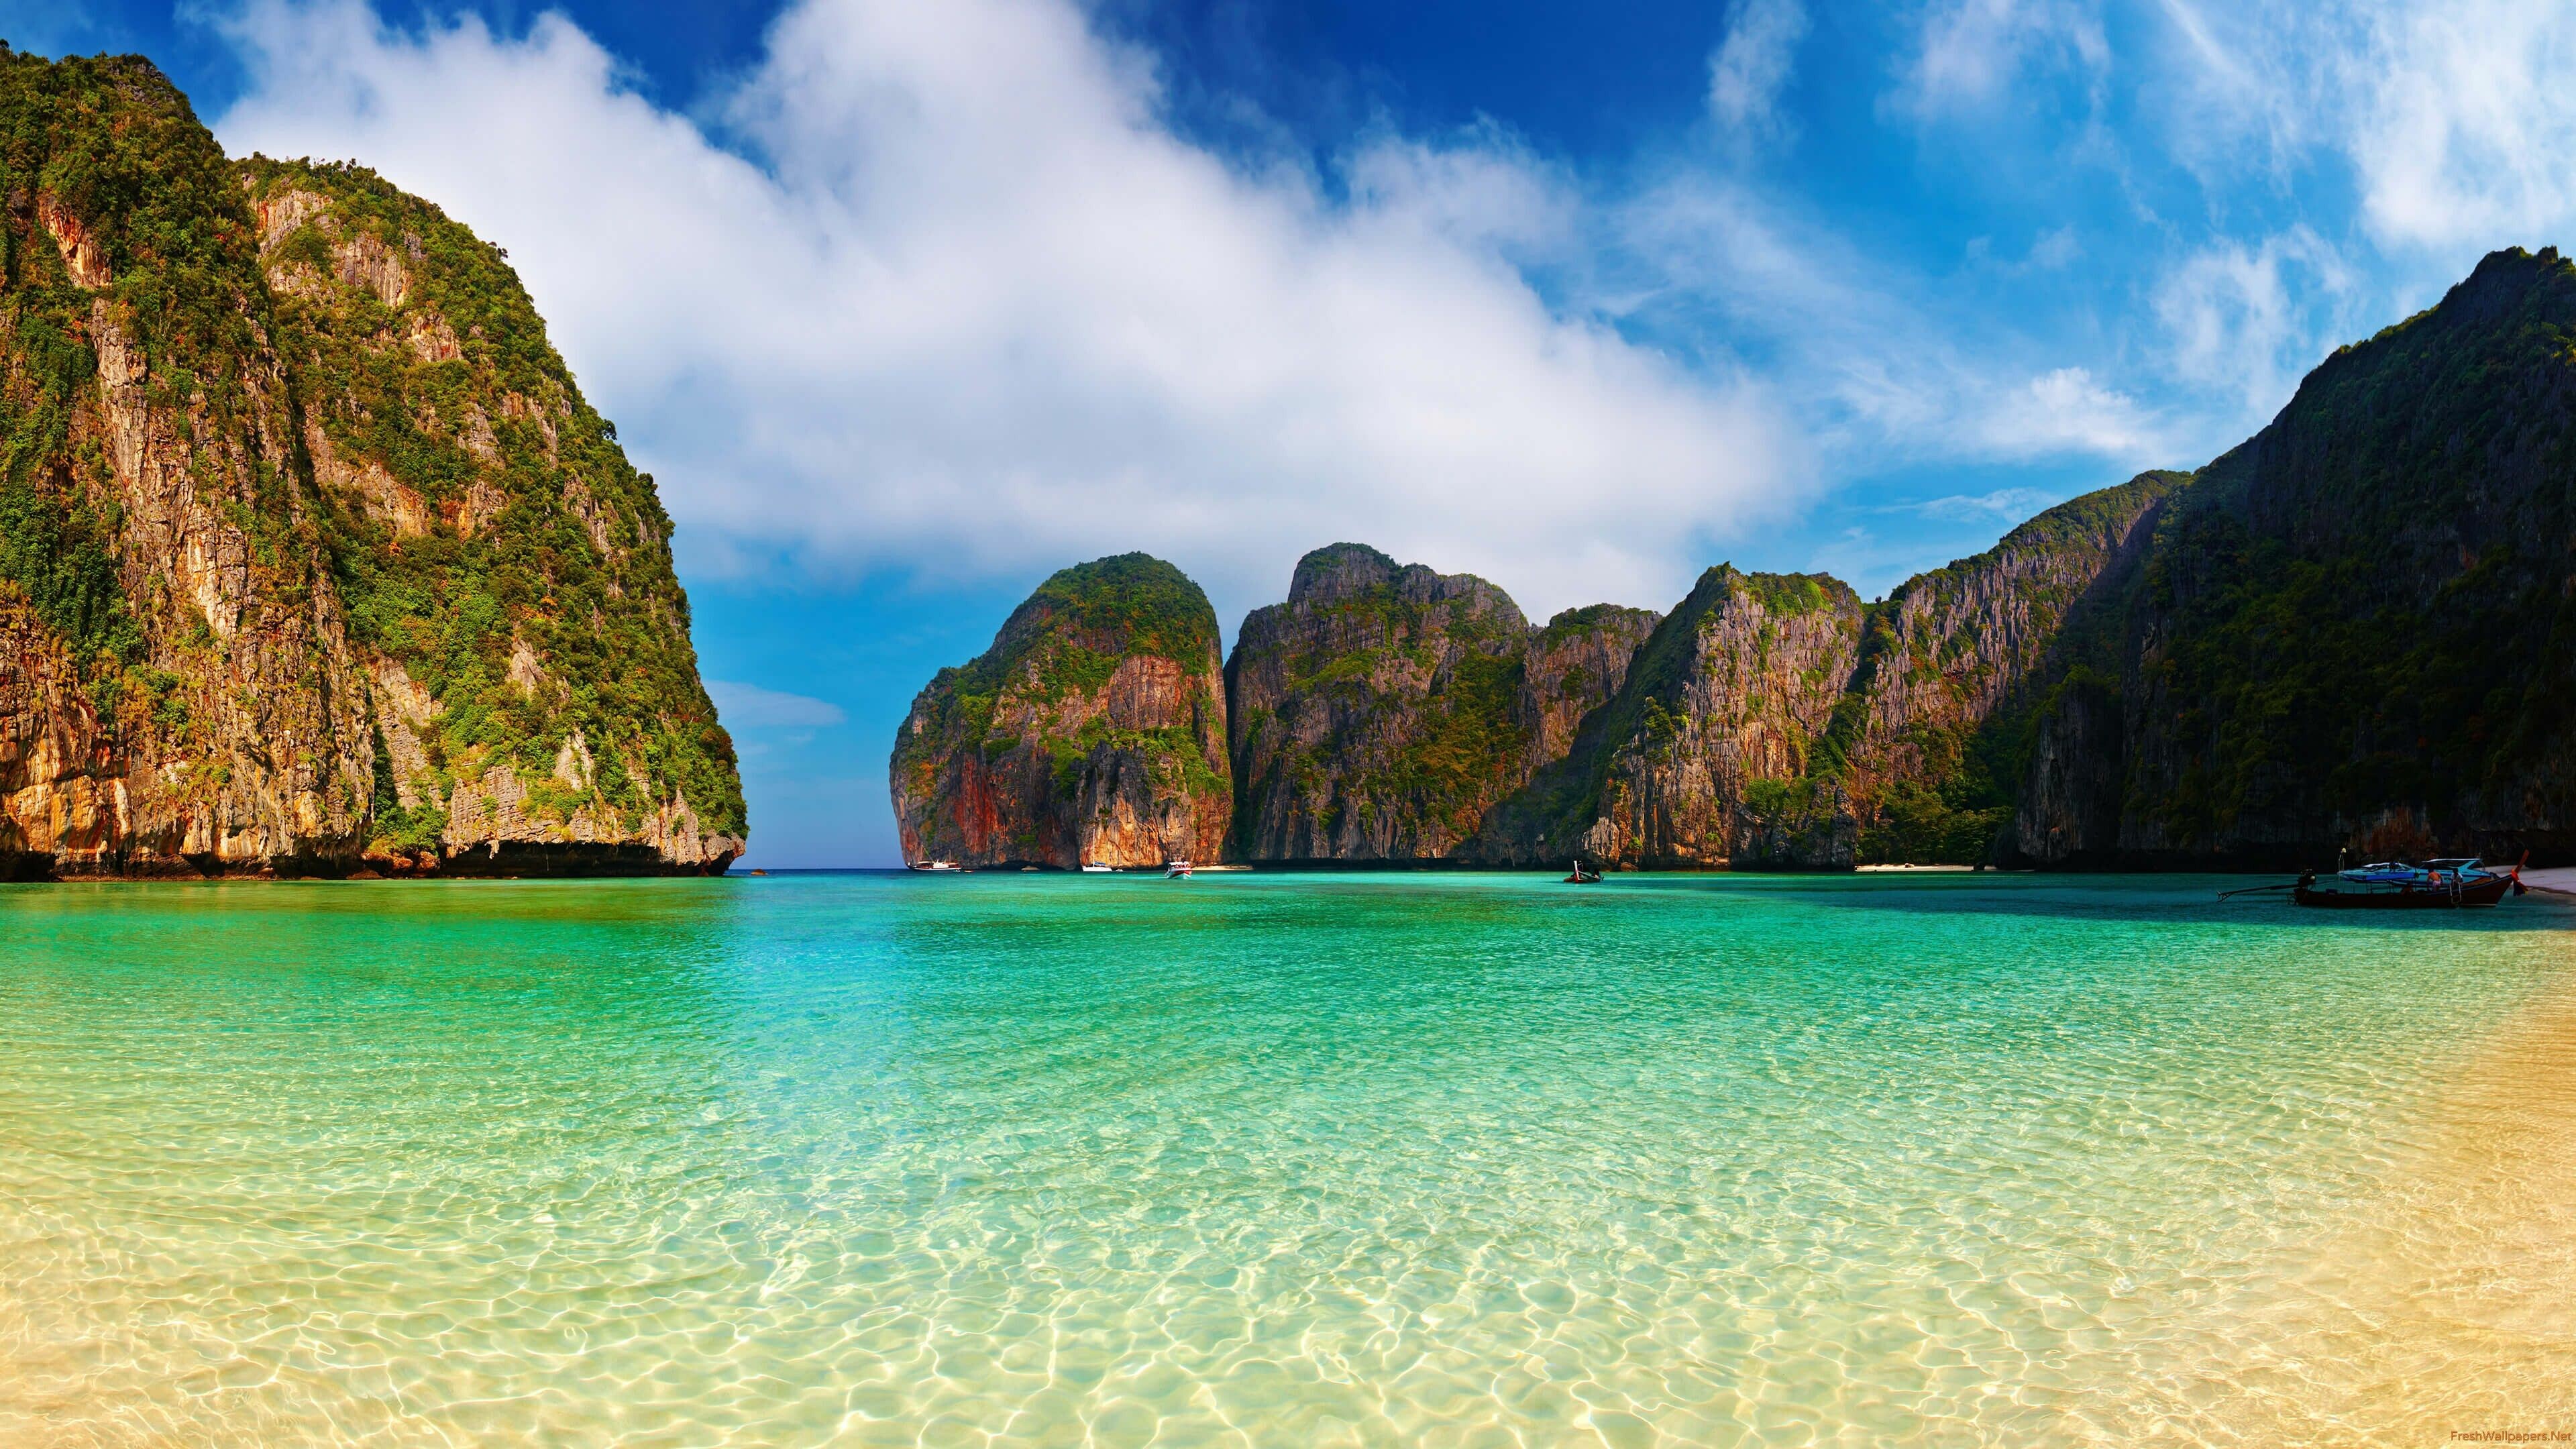 Phi Phi: The part of Krabi Province, Turquoise waters. 3840x2160 4K Wallpaper.